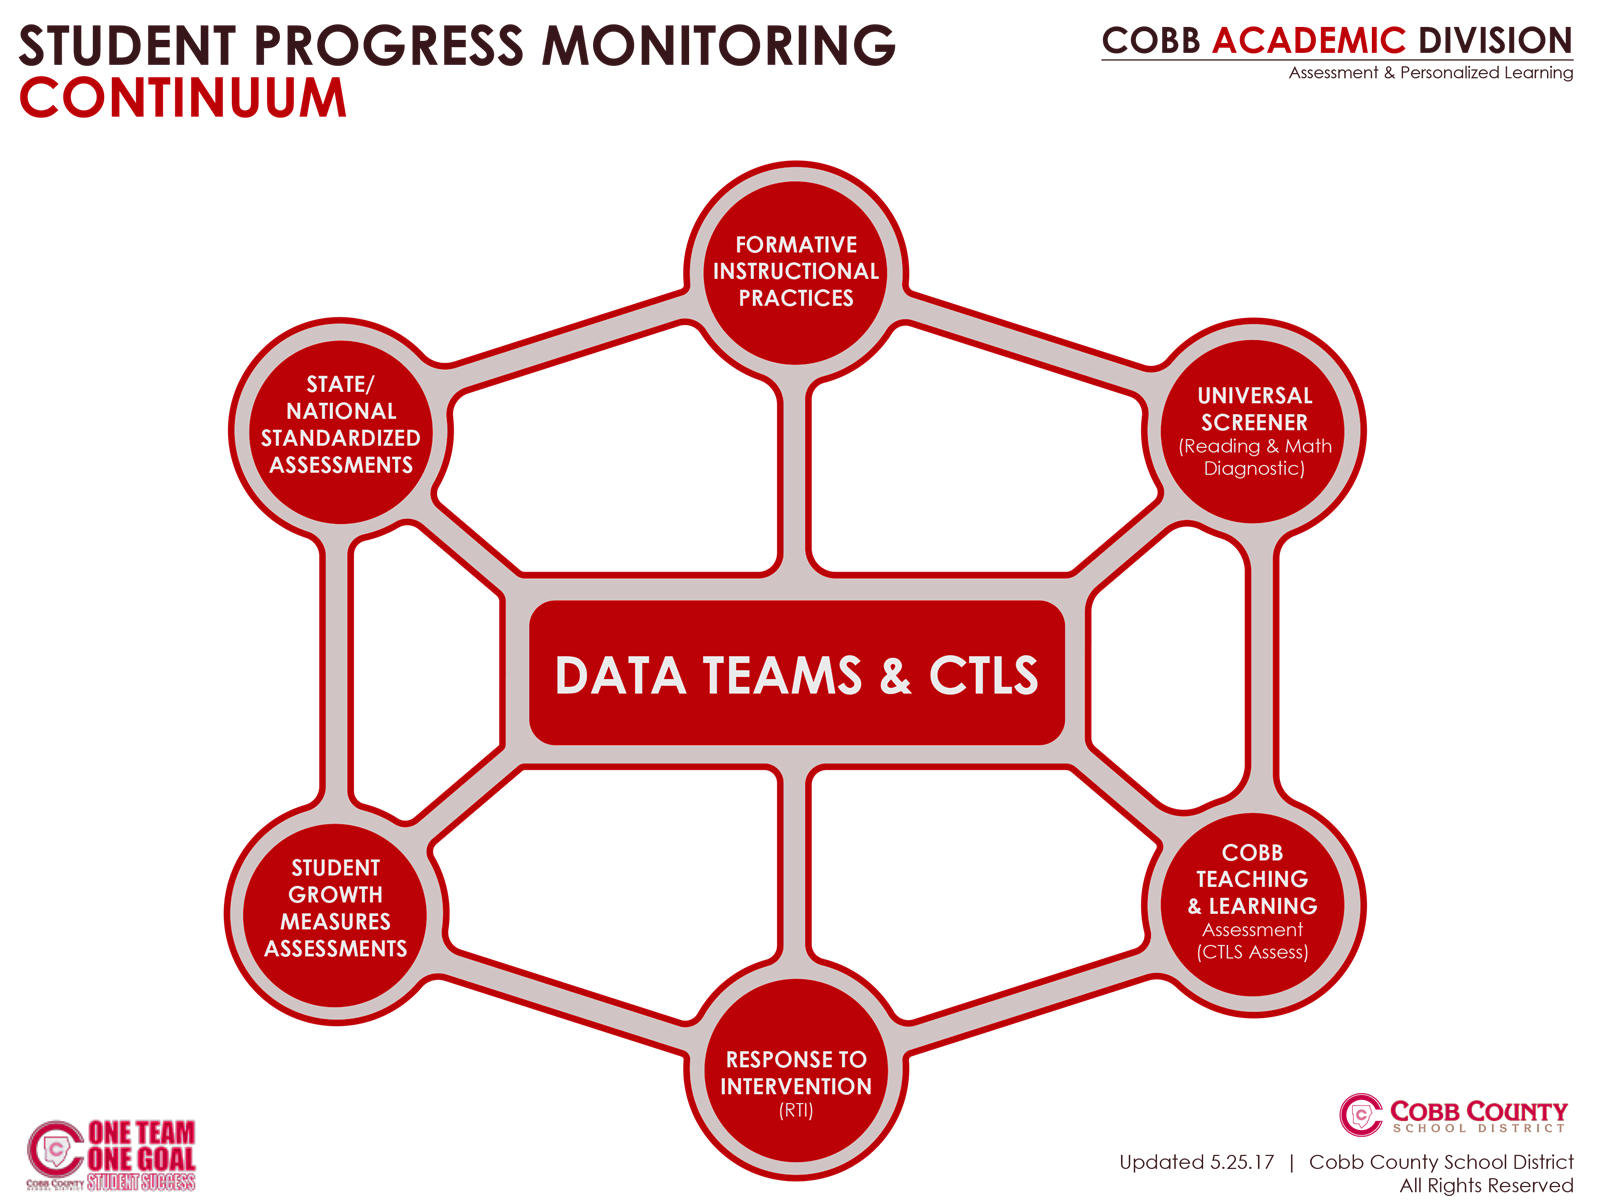 Assessment and Personalized Learning Data Teams and CTLS Chart 